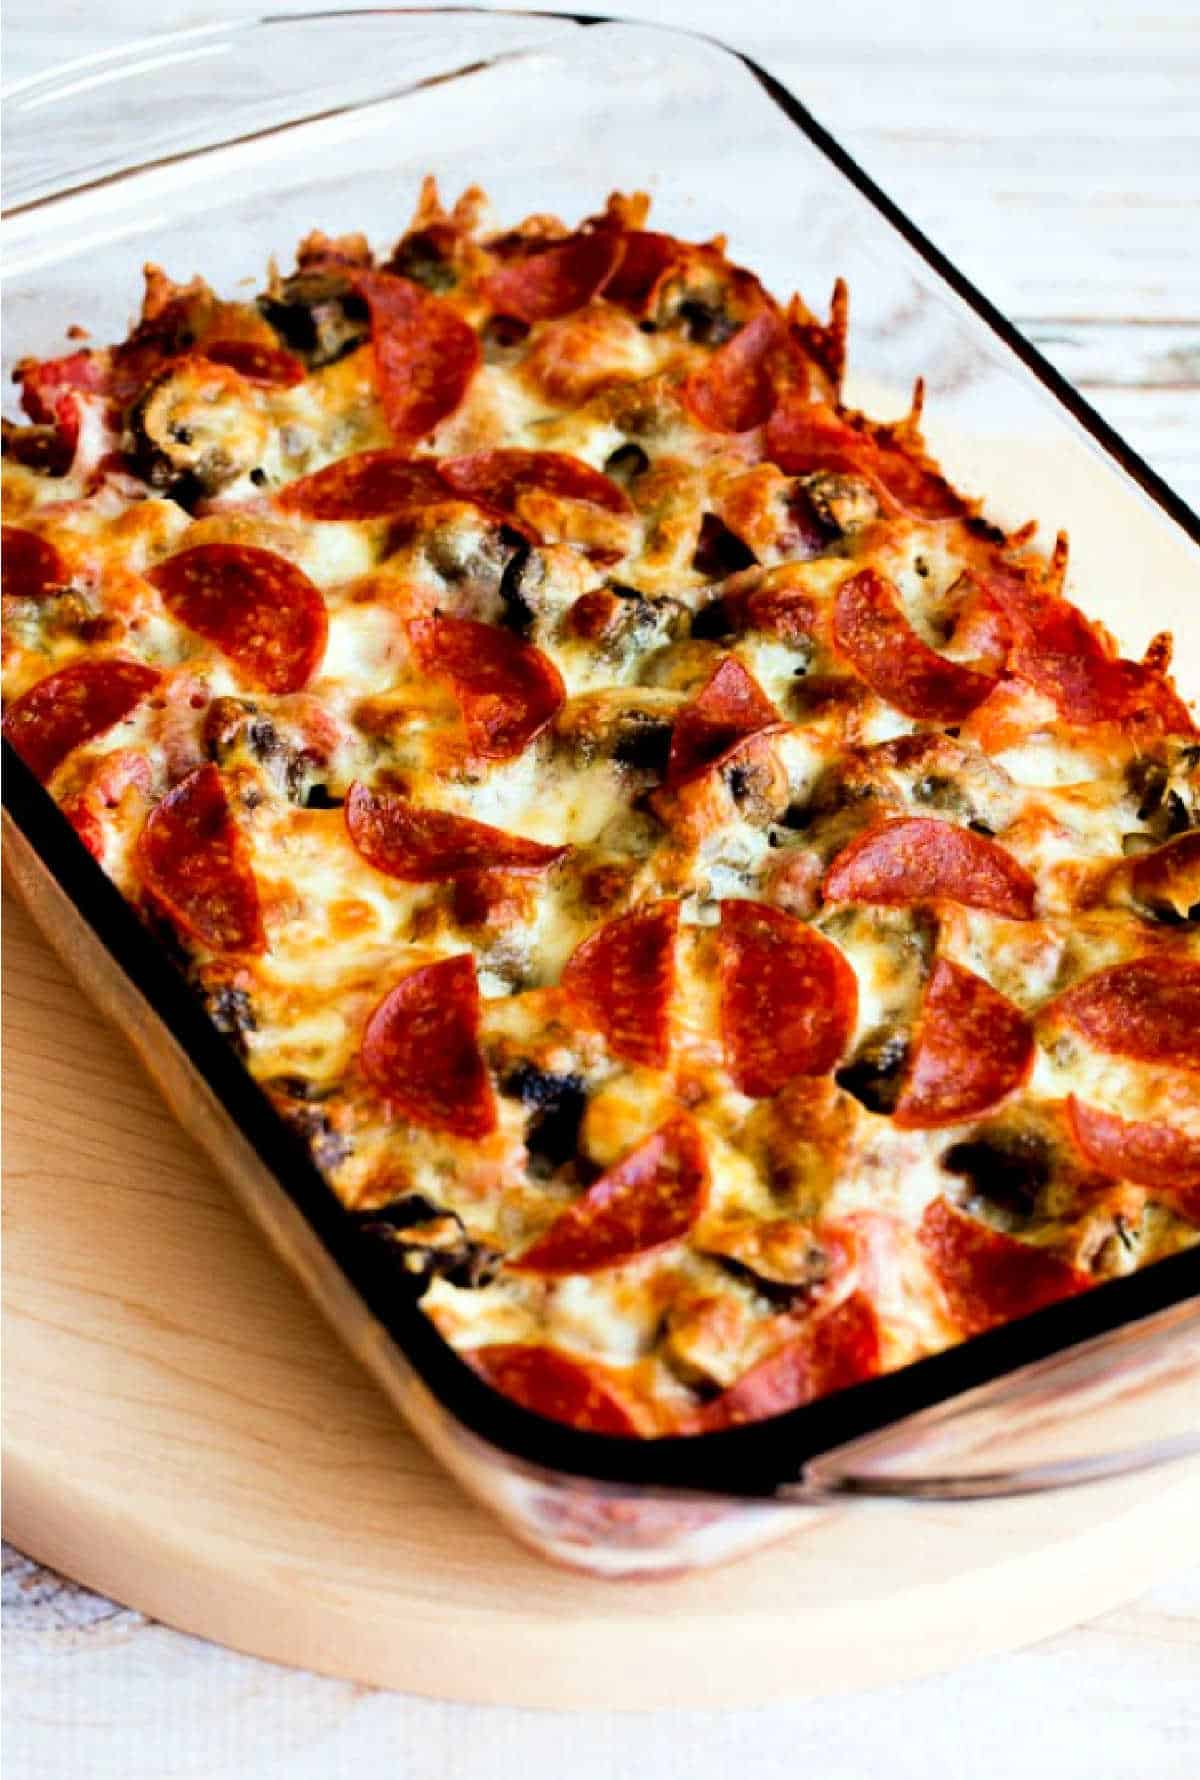 Low-Carb Deconstructed Pizza Casserole in baking dish on cutting board